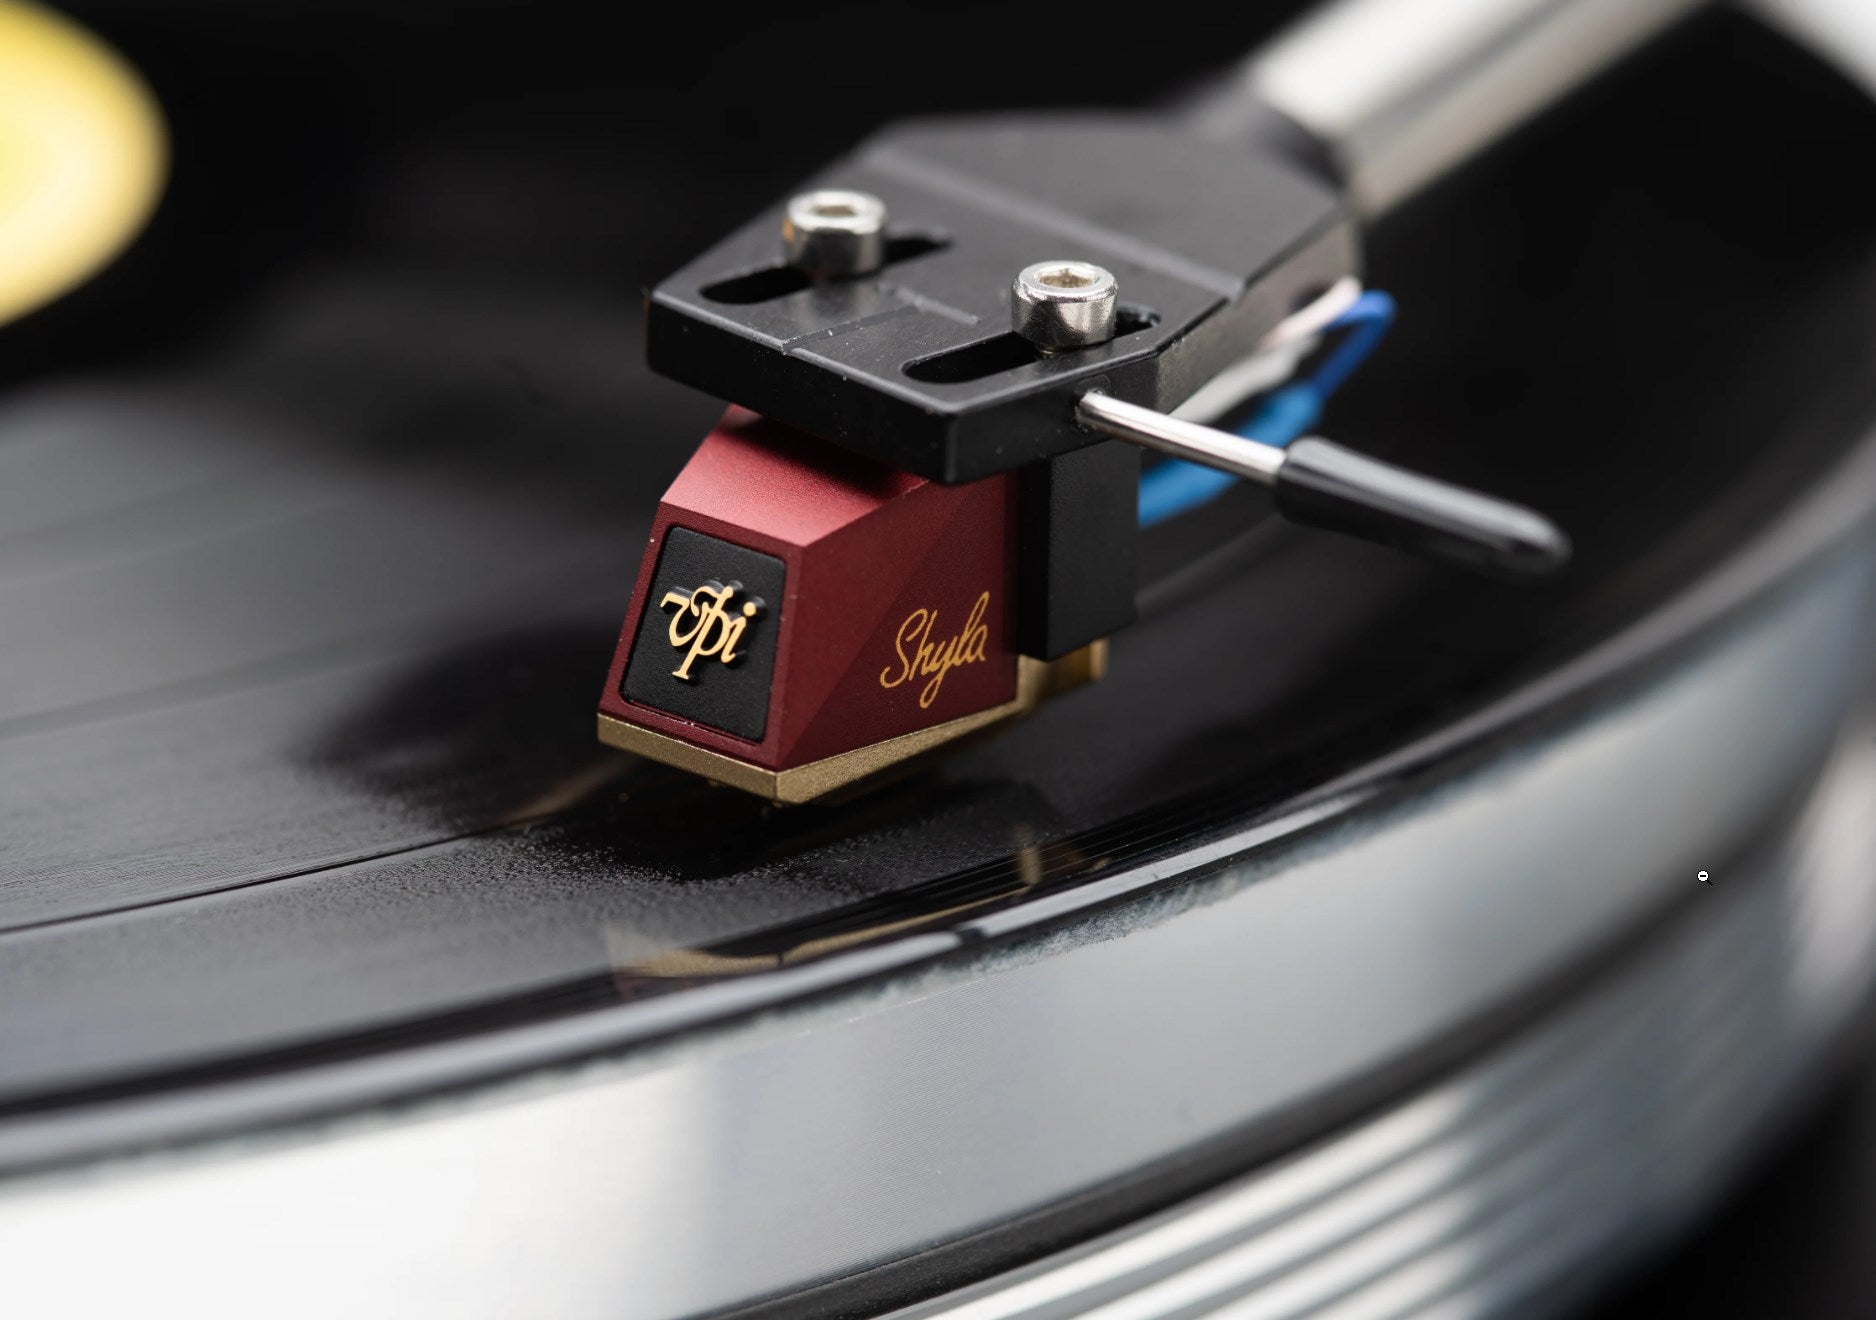 VPI Industries Scout-21 Turntable